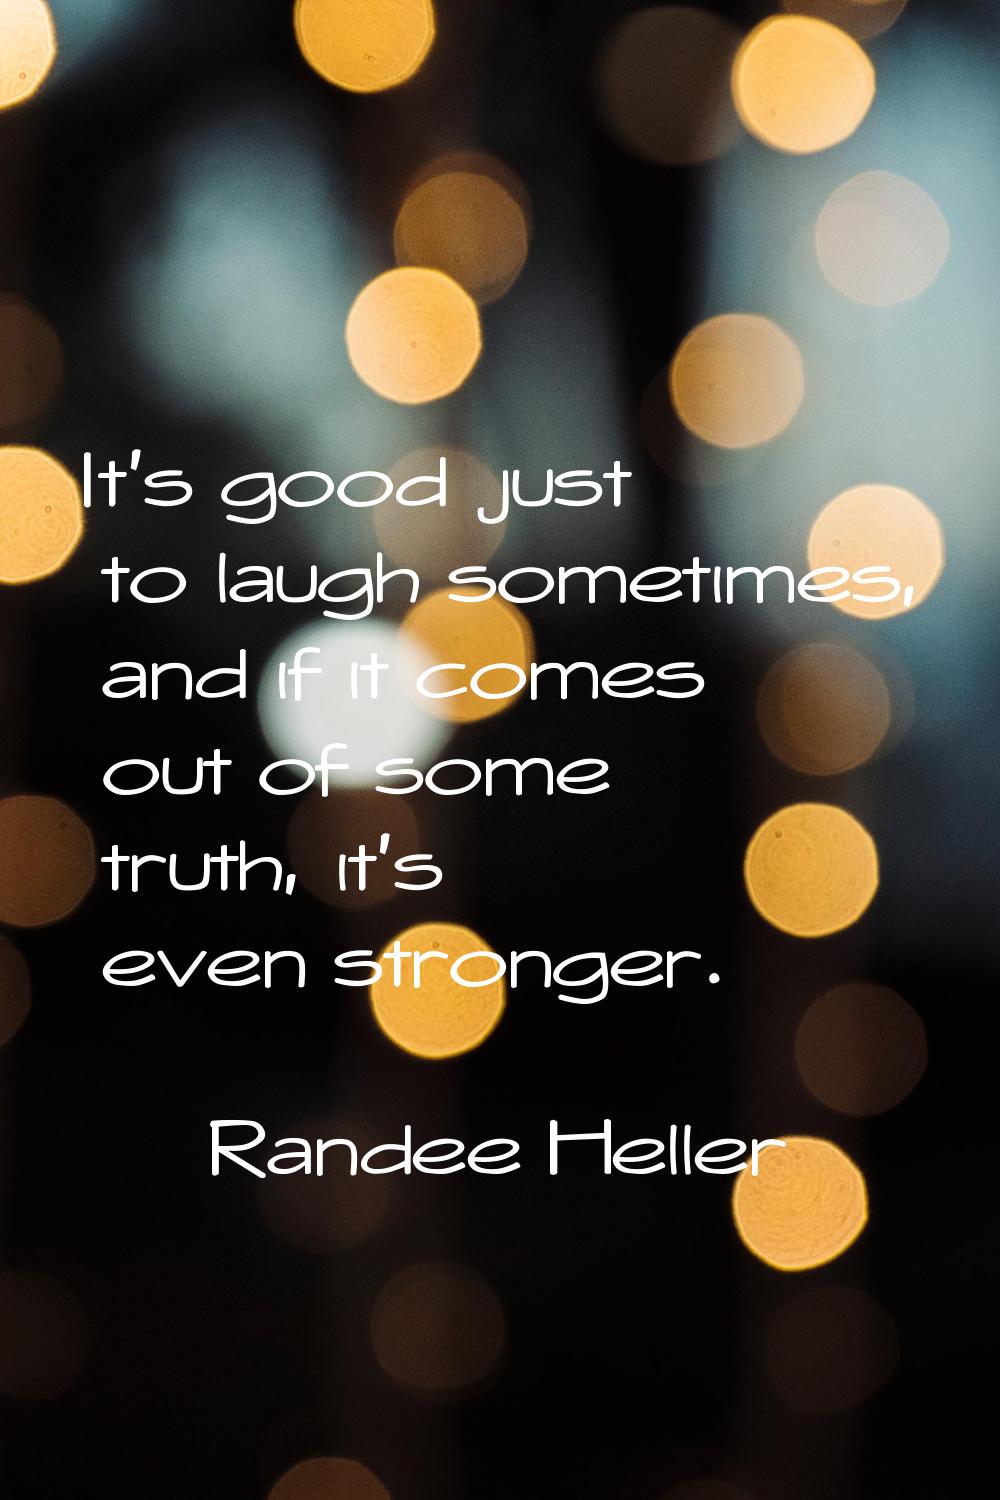 It's good just to laugh sometimes, and if it comes out of some truth, it's even stronger.